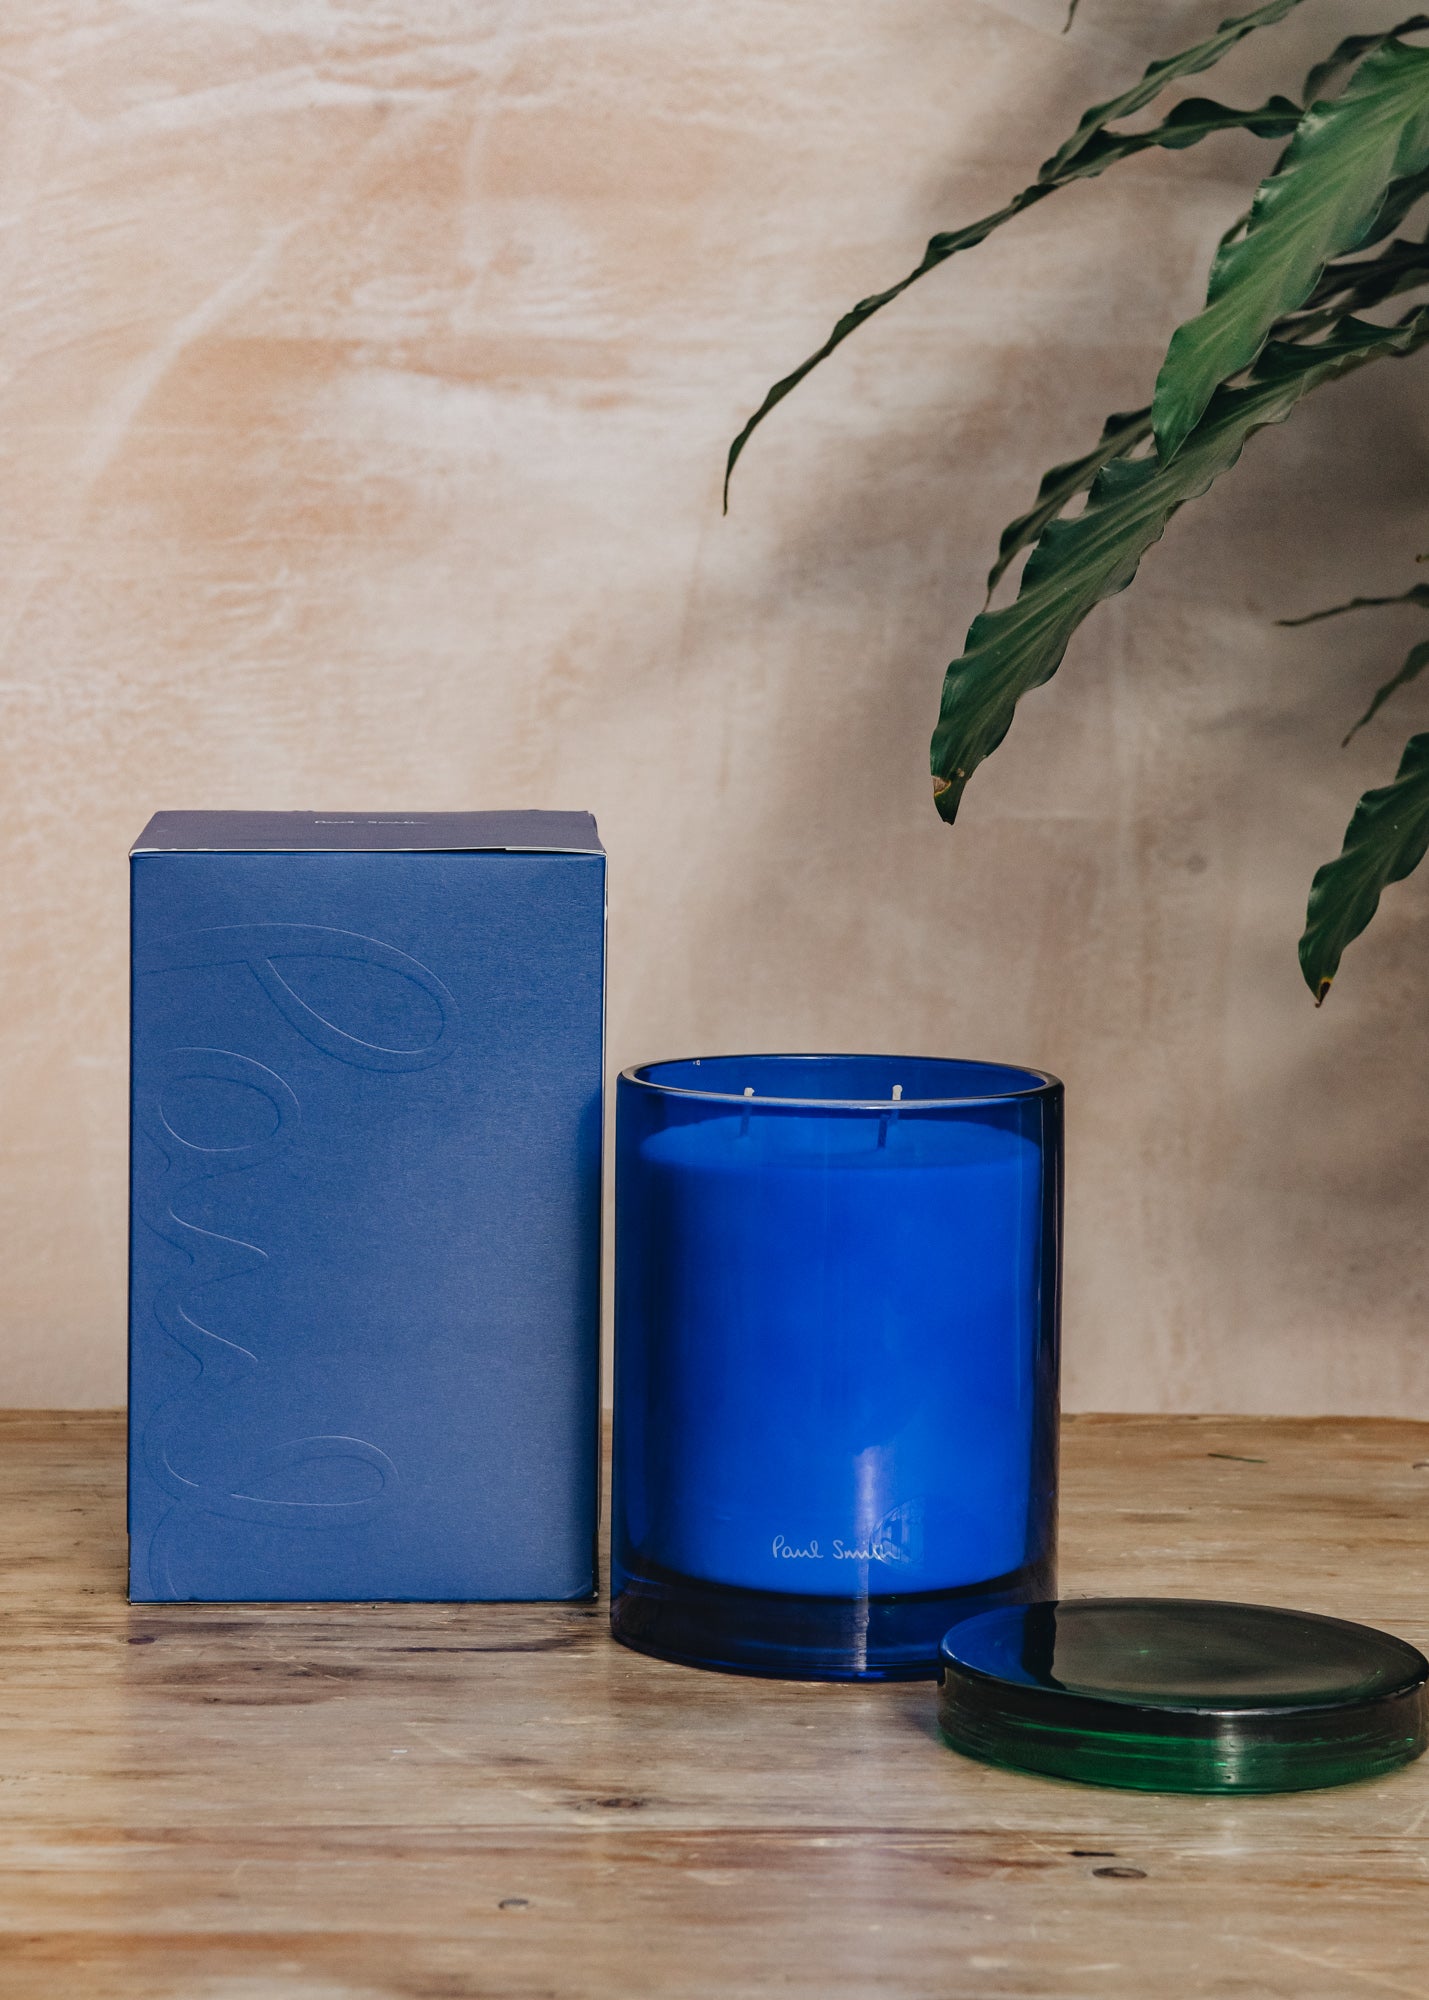 Paul Smith Scented Candle in Early Bird (1000g)